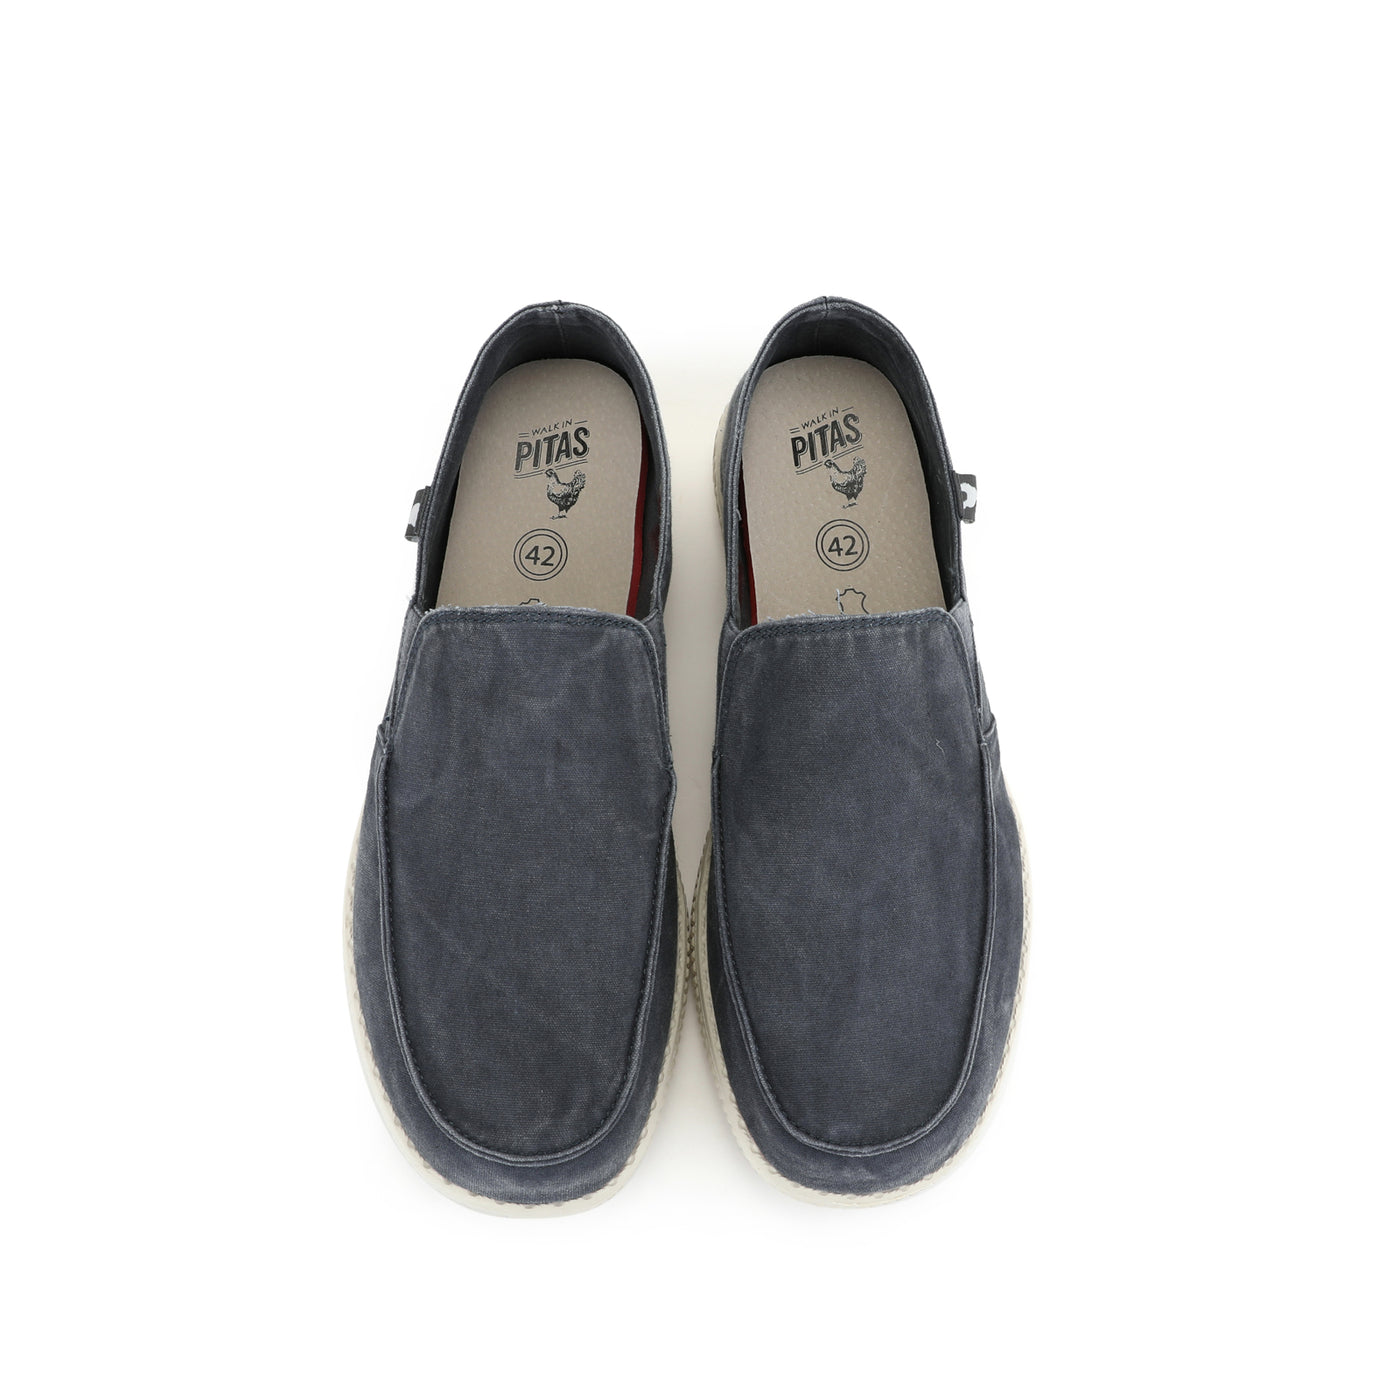 WP150 Navy Blue Washed Canvas Slip-On Loafers